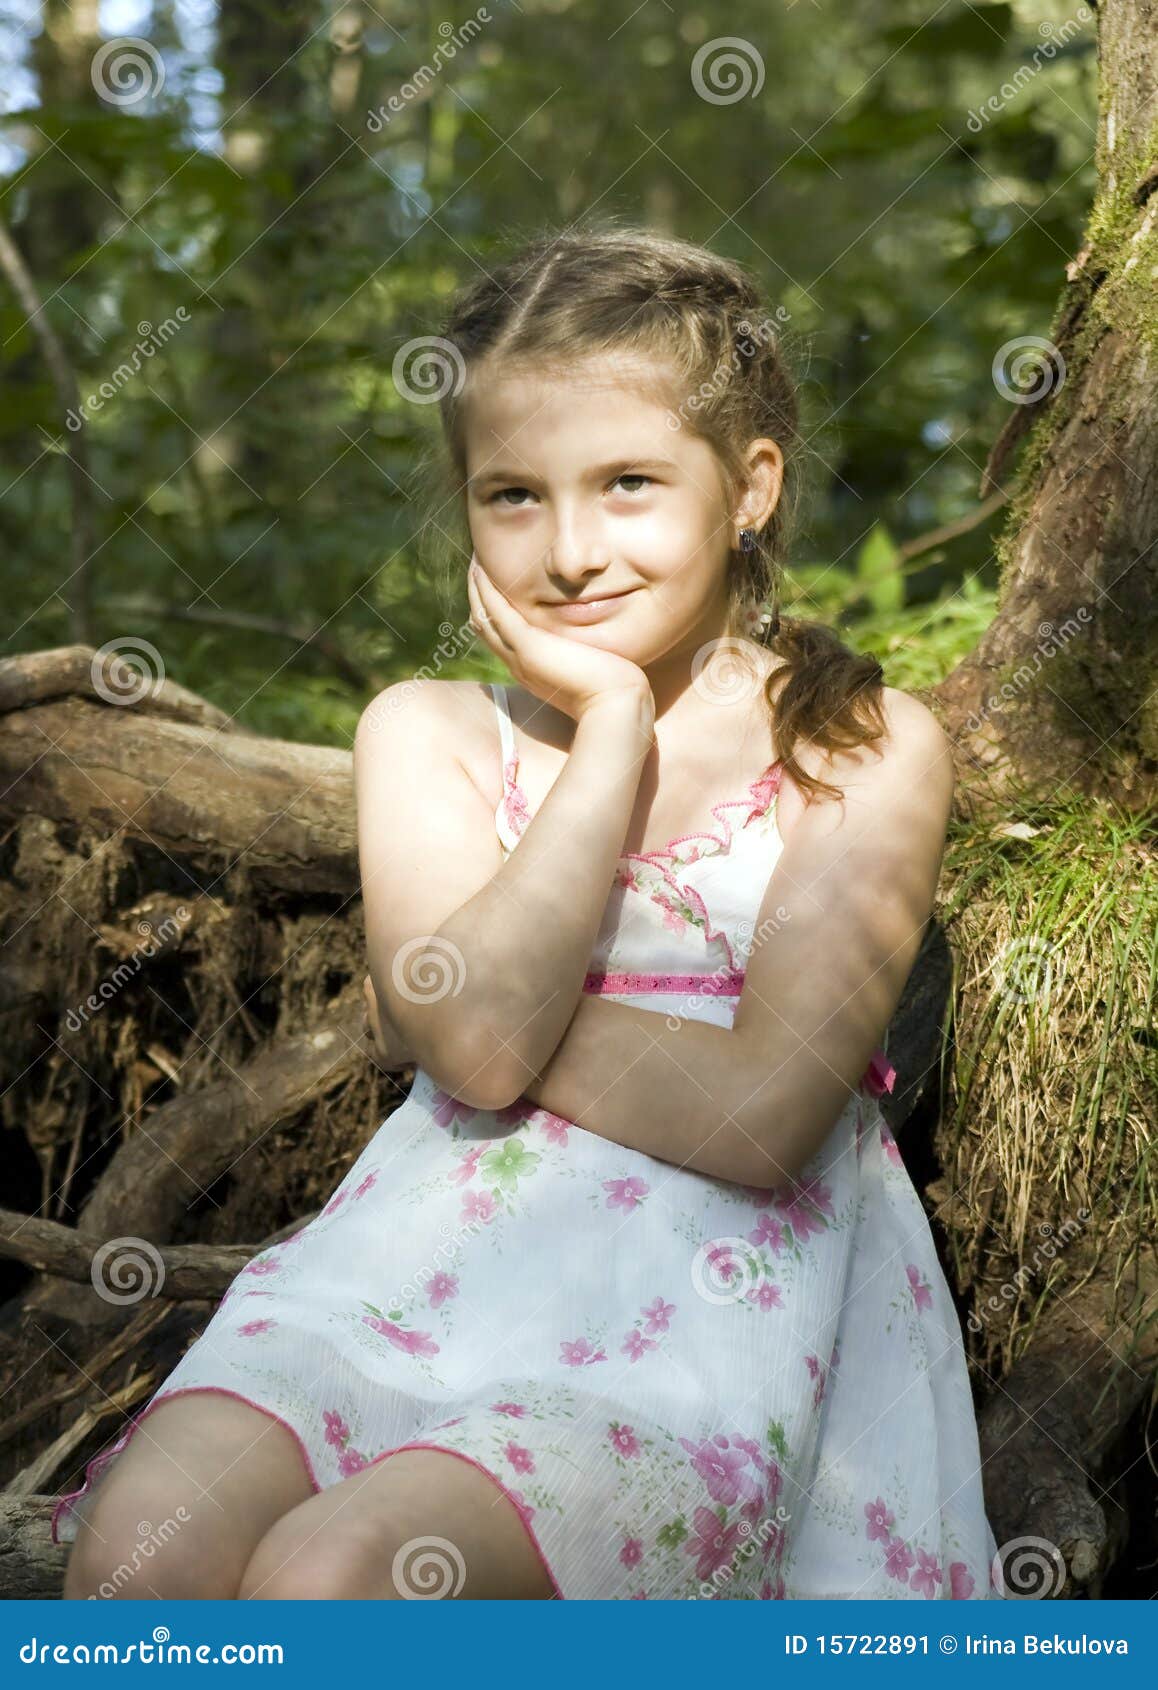 Girl sits in wood stock image. Image of attitude, child - 15722891